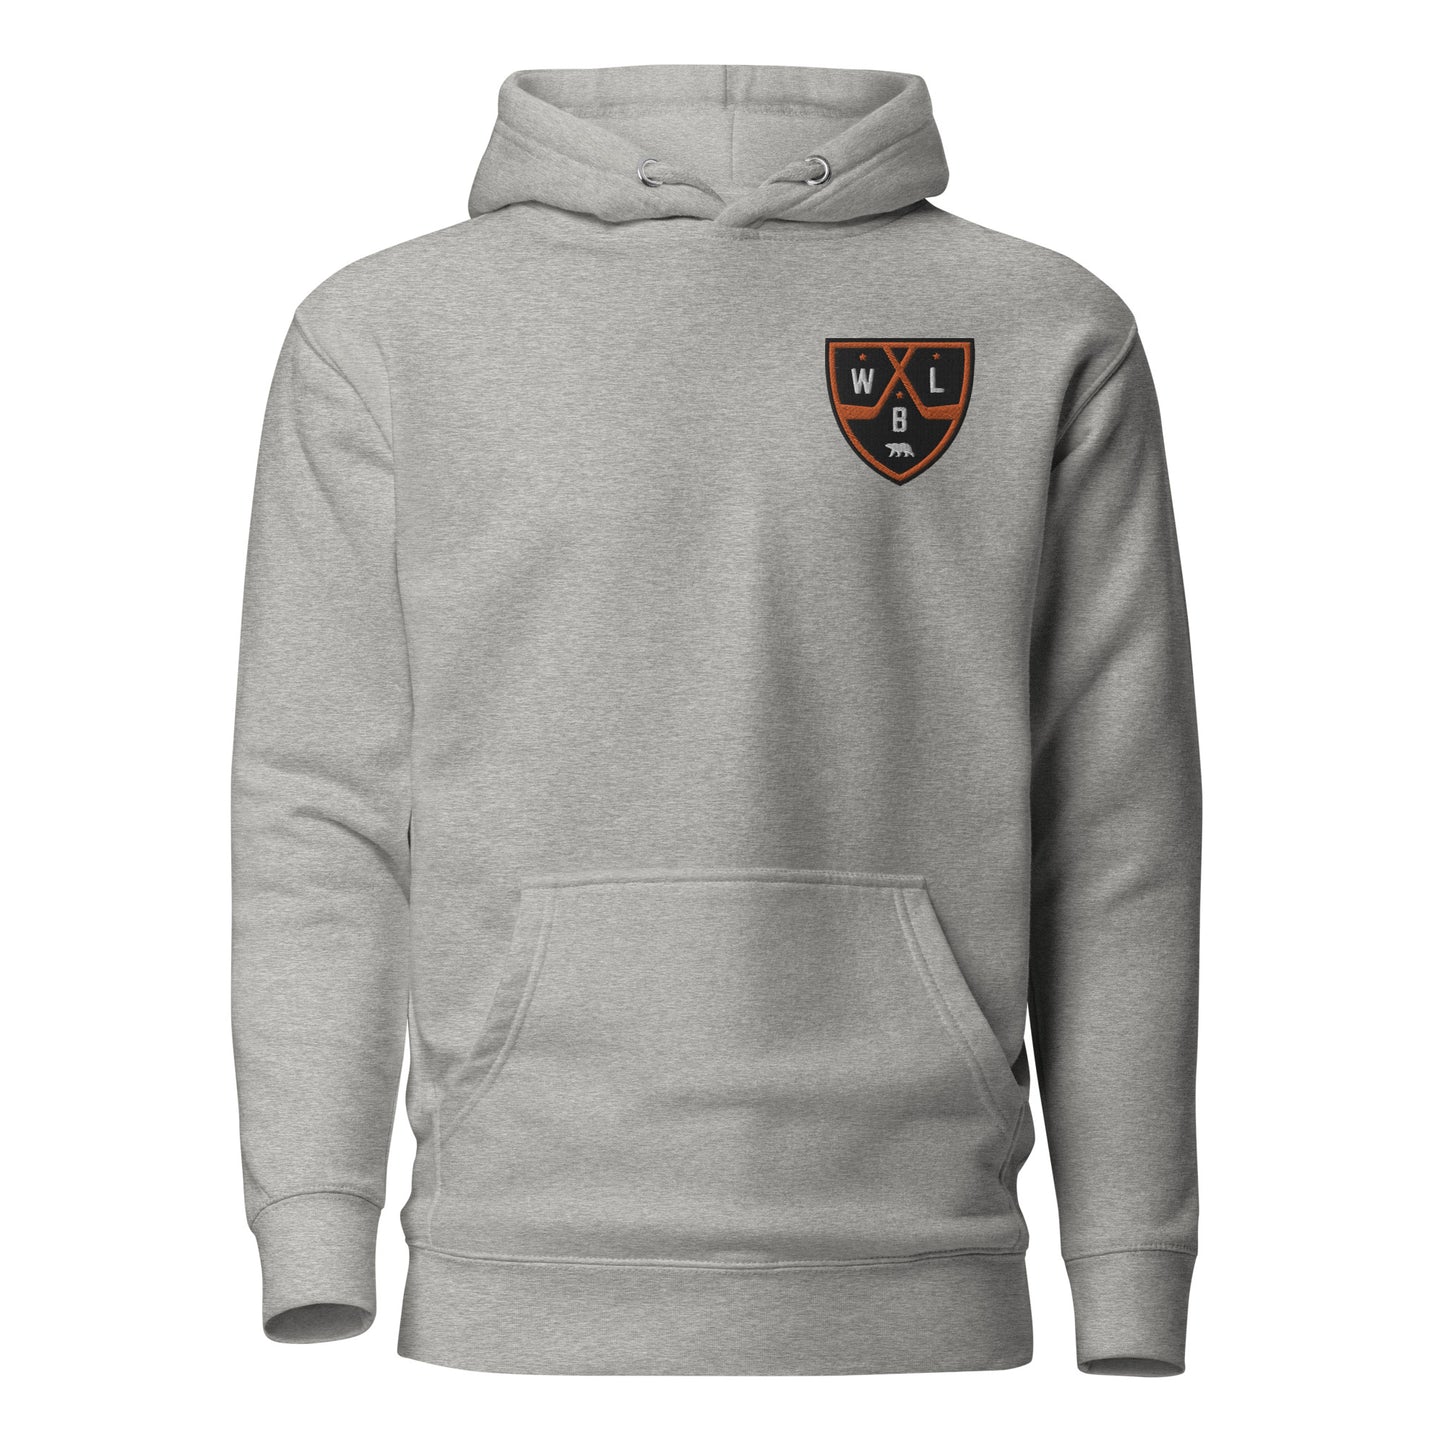 WBLAHA Shield Left Chest Embroidered Hoodie